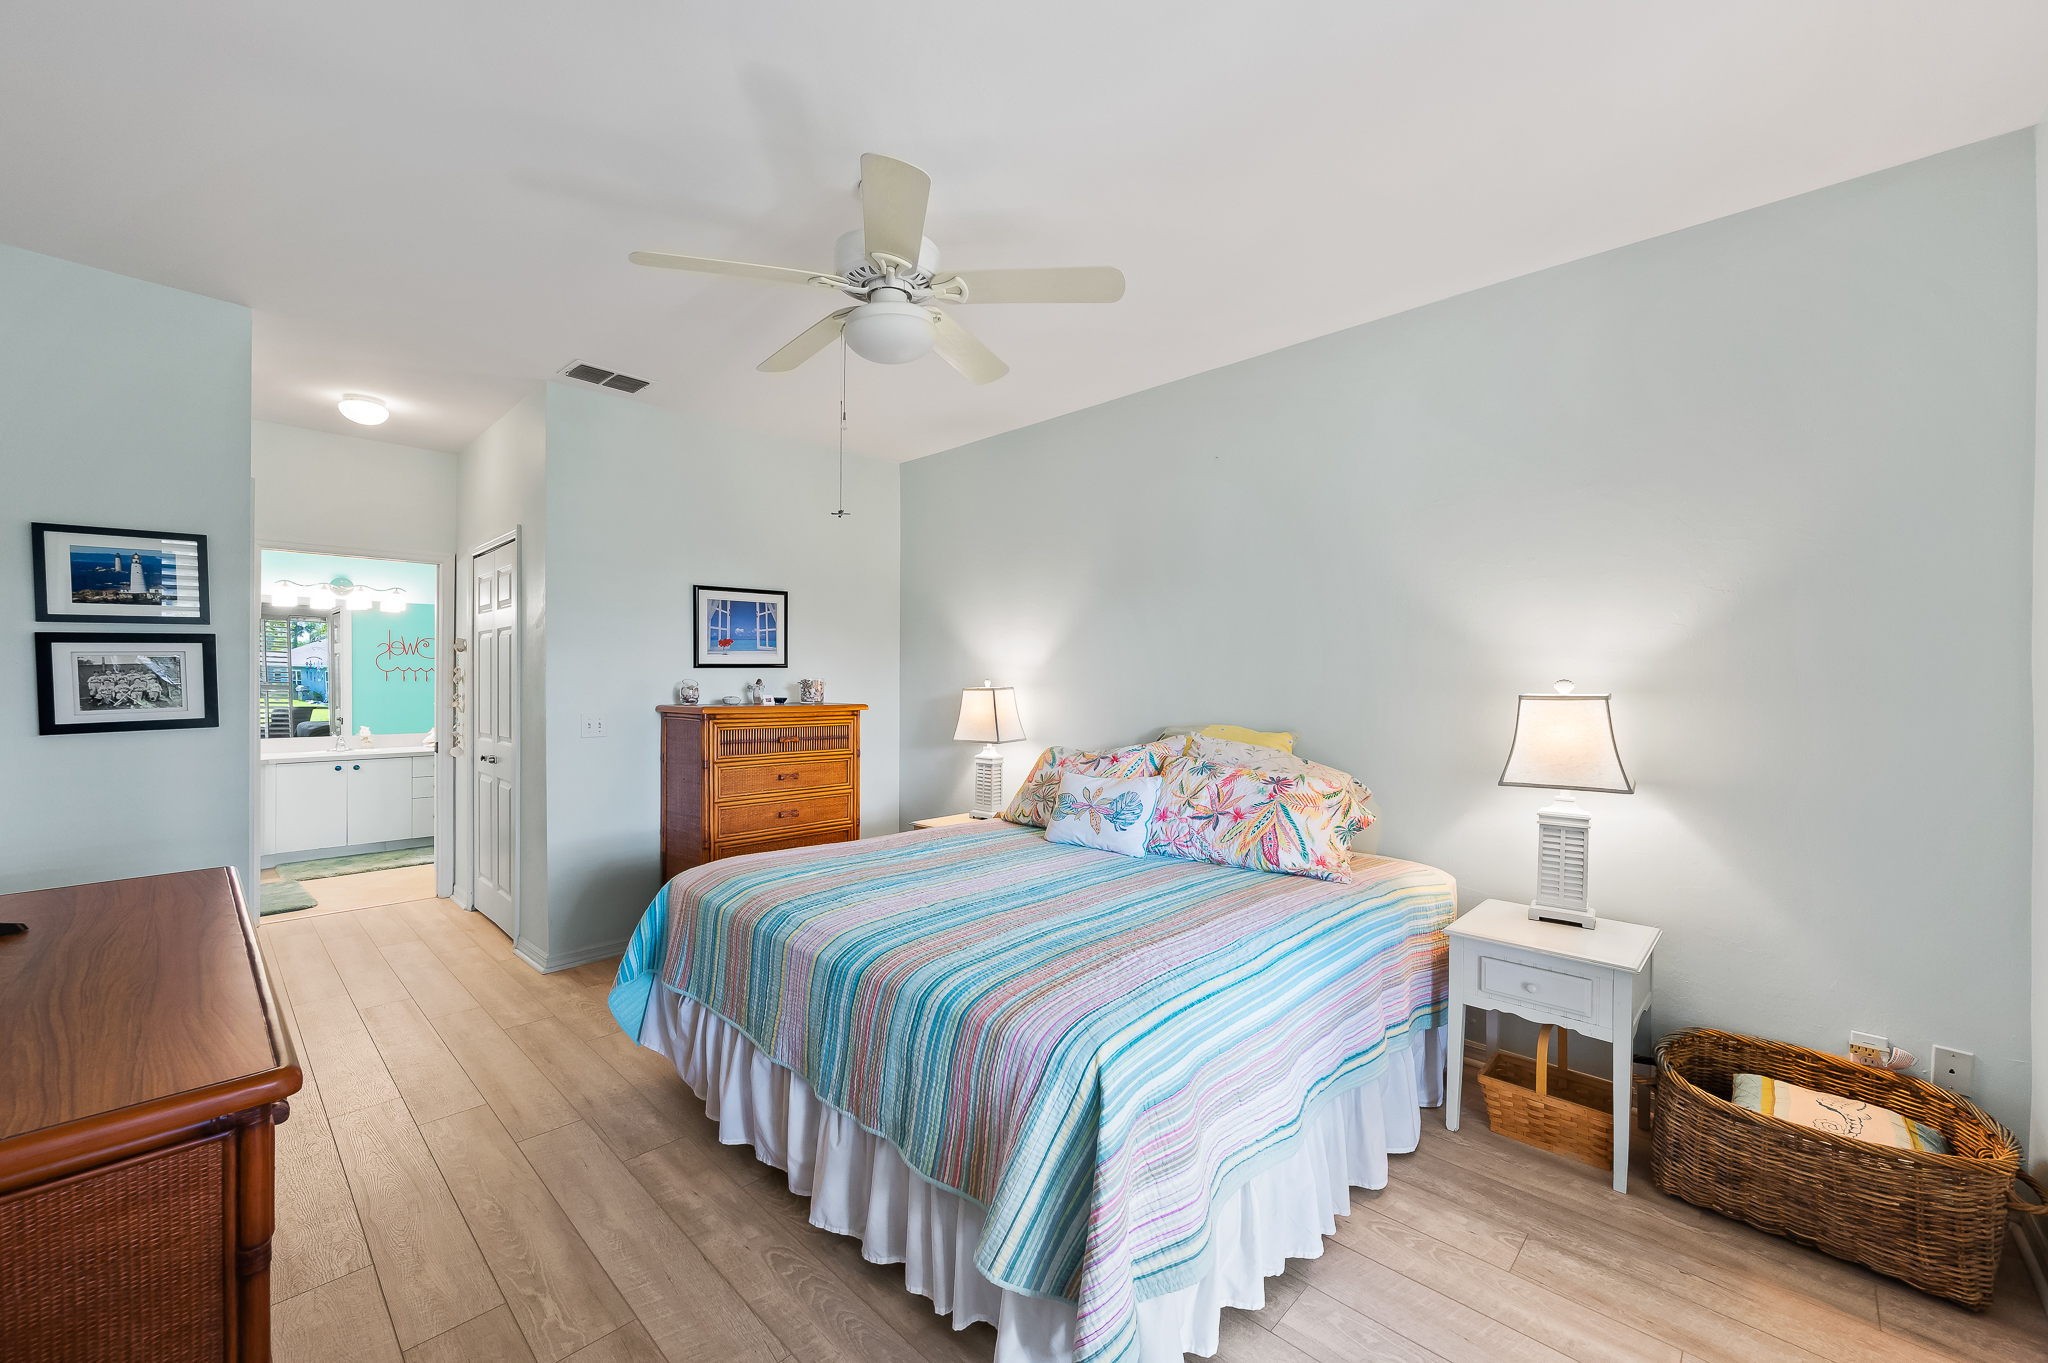 Primary Bedroom with huge walk-in closet and access to lanai. Beautiful water view beyond the sliding plantation shutter panels.